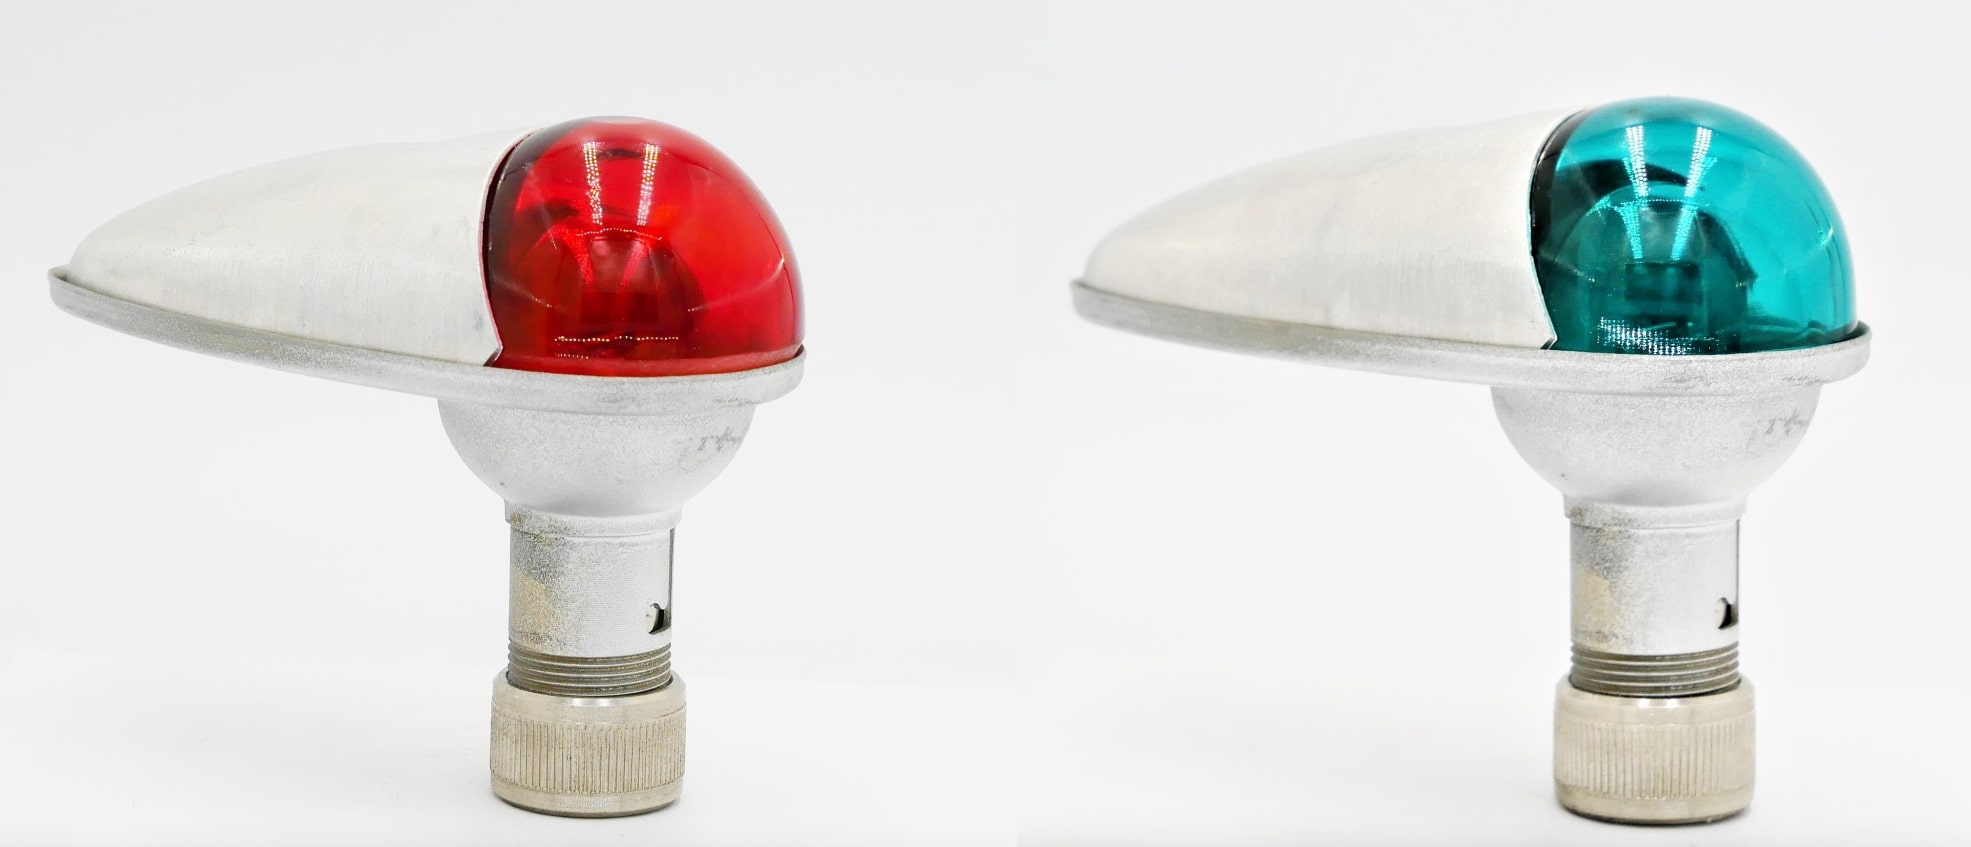 CLASSIC NAVIGATION LIGHTS WITH COLORED CAPS